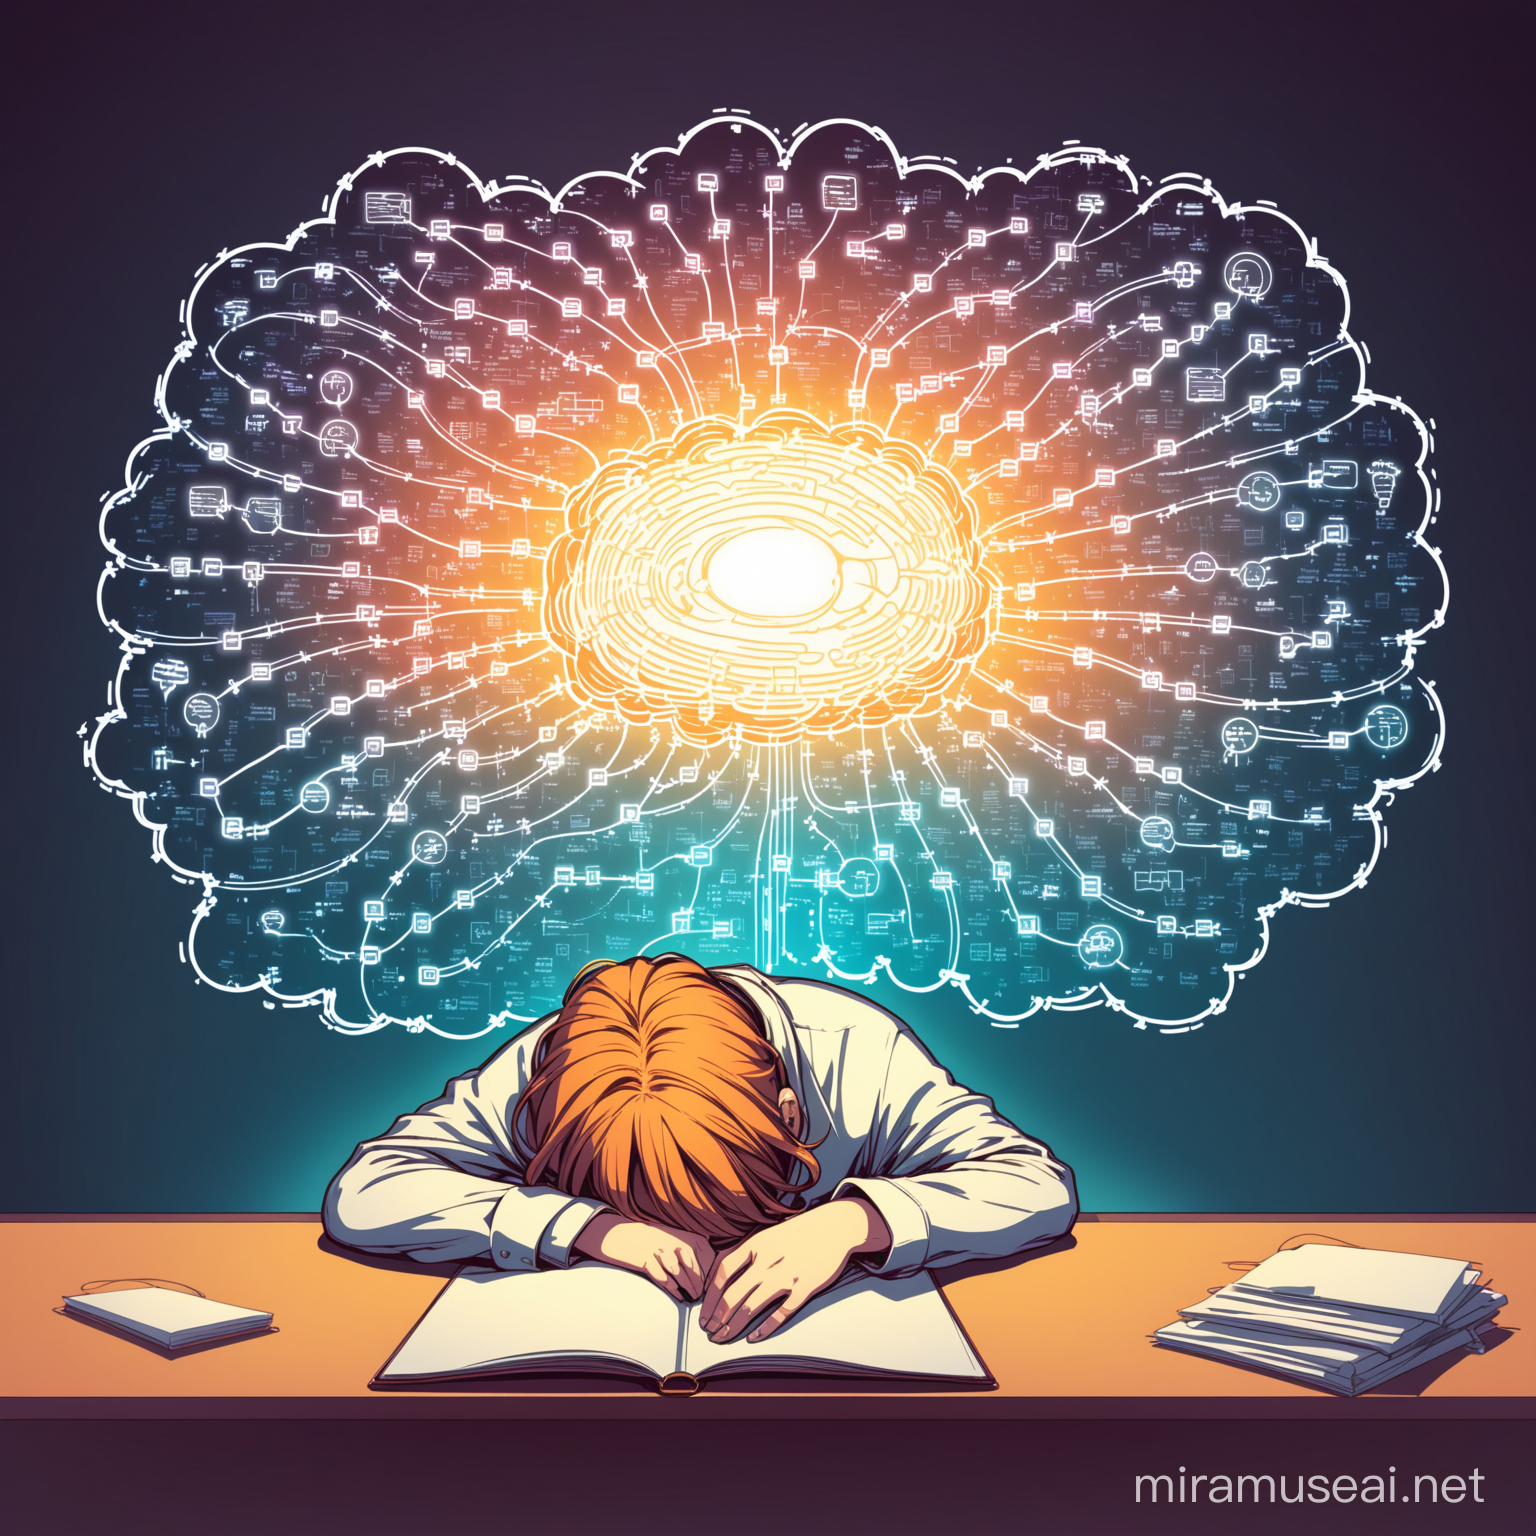 Exhausted person slumped at desk. Expanding from thought bubble is ever expanding mindmap. Background light cyber effect.